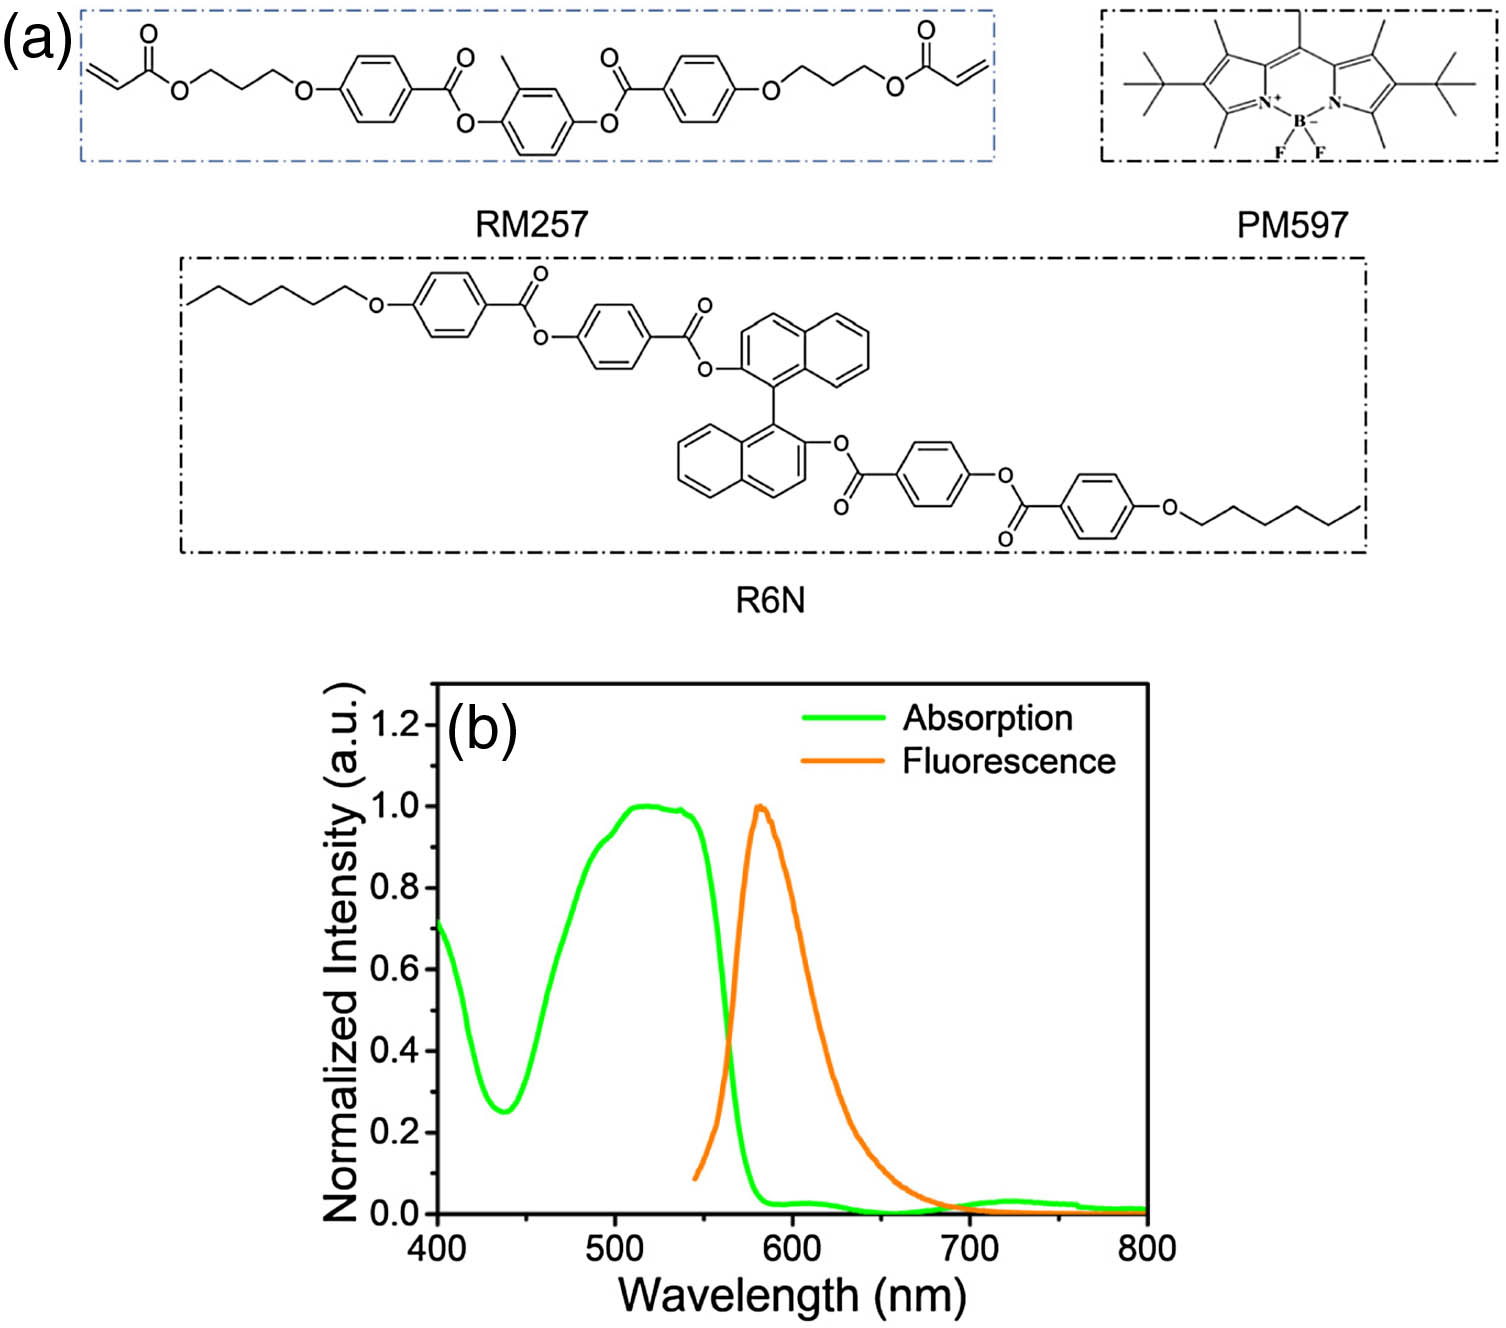 Chemical structures of chiral dopant R6N, liquid-crystal monomer RM257, and laser dye pyrromethene 597 and the fluorescence spectrum and absorption spectrum of laser dye PM597 in a nematic LC mixture.